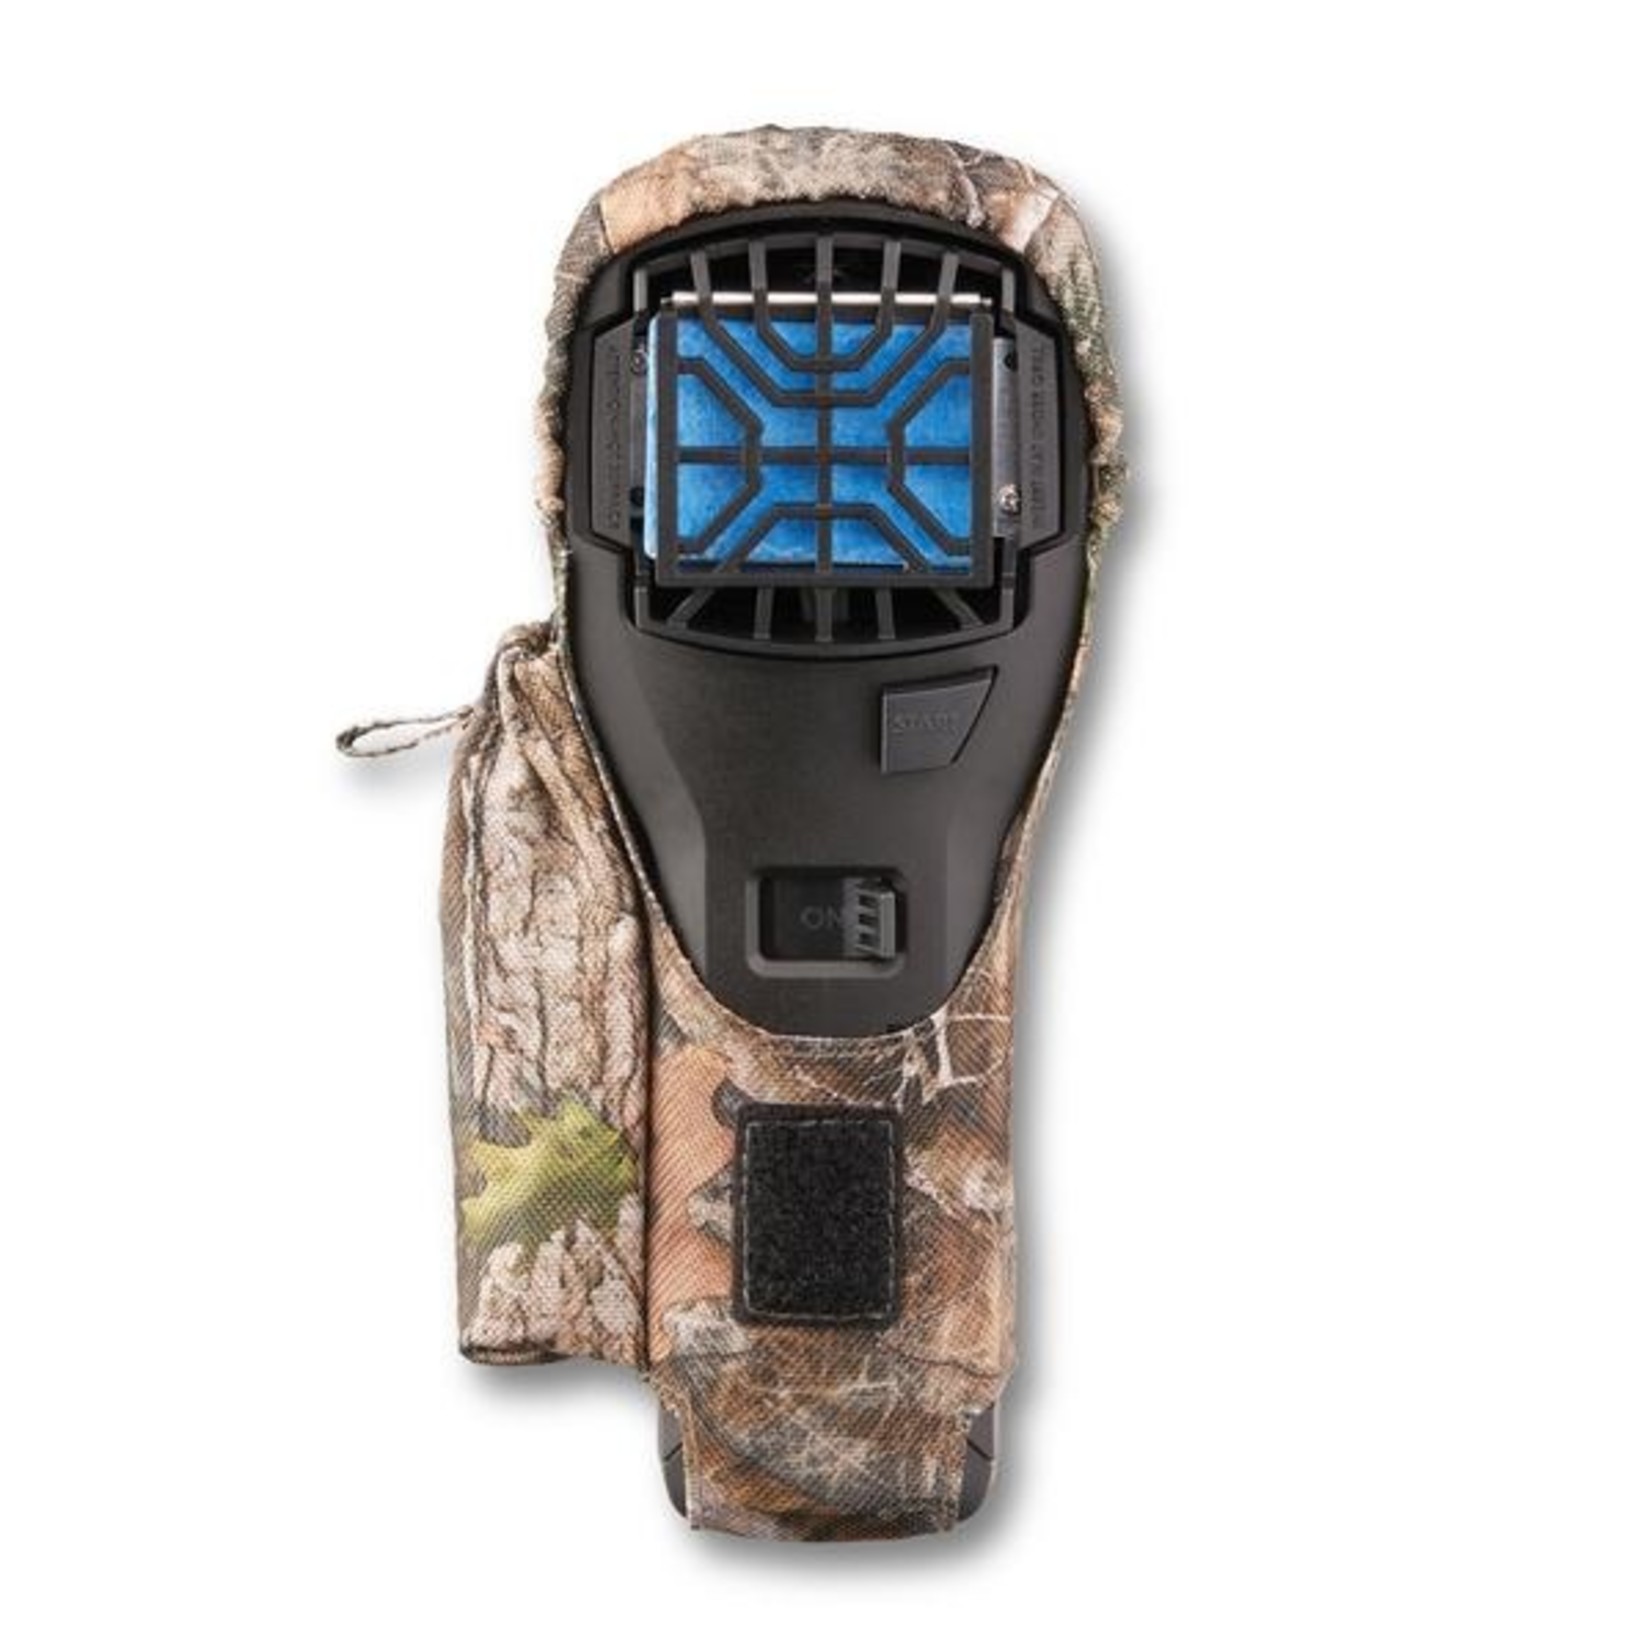 Thermacell Chasse-moustiques Thermacell et étui de chasse camouflage MR300